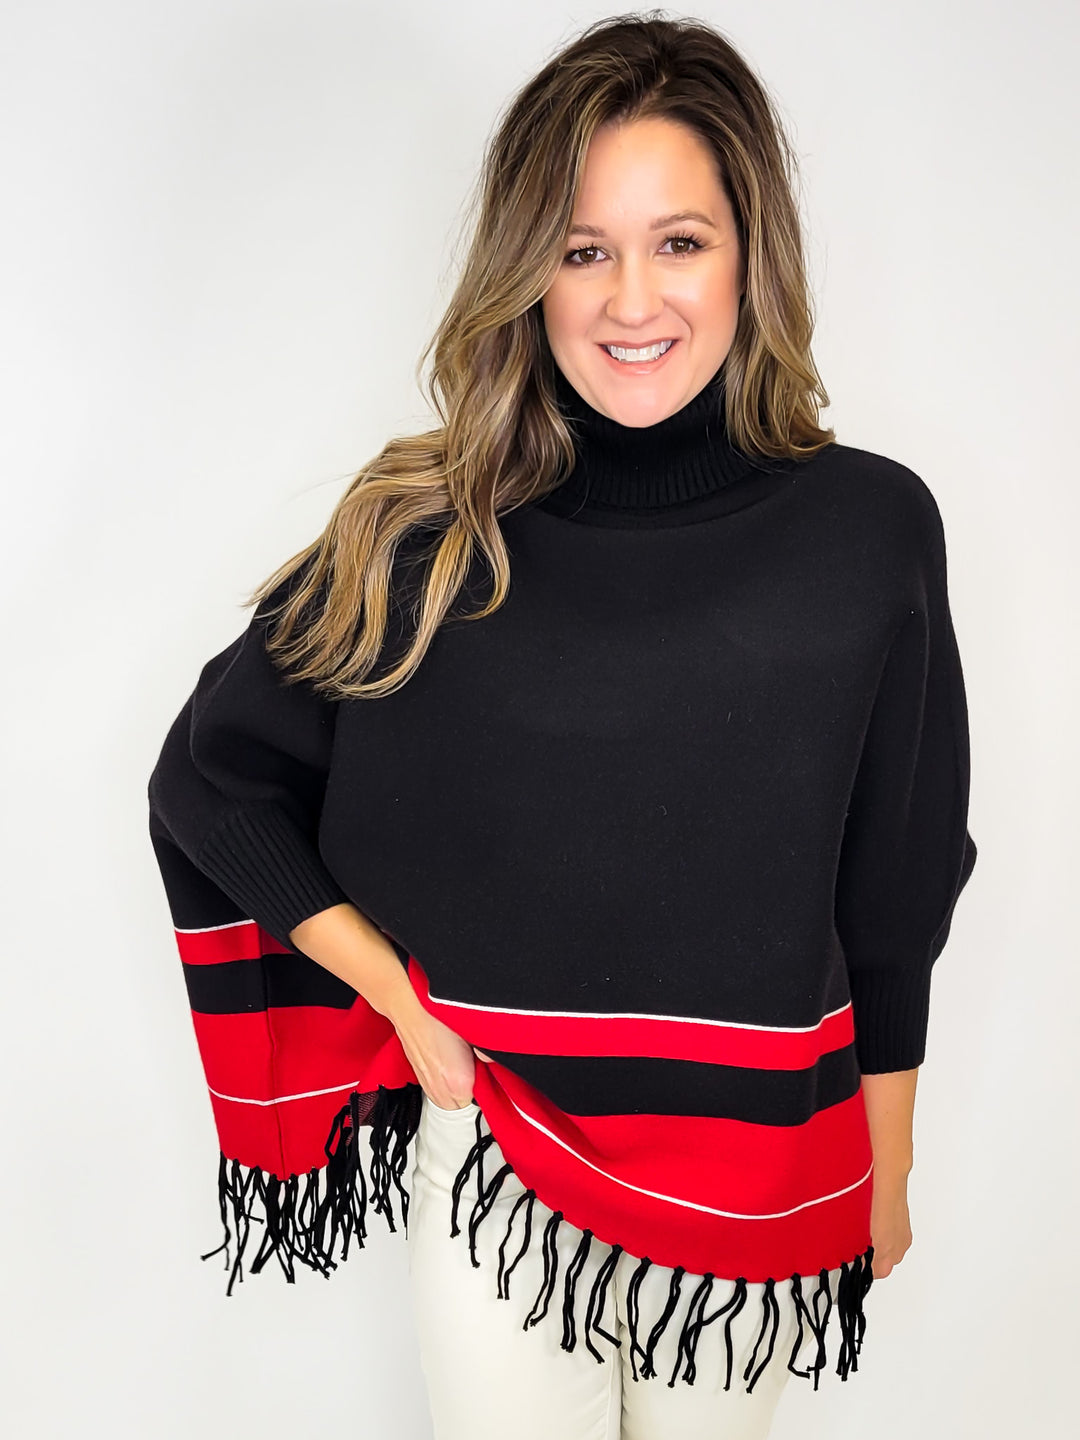 Poncho Cowl Neck Top - Red Black Striped